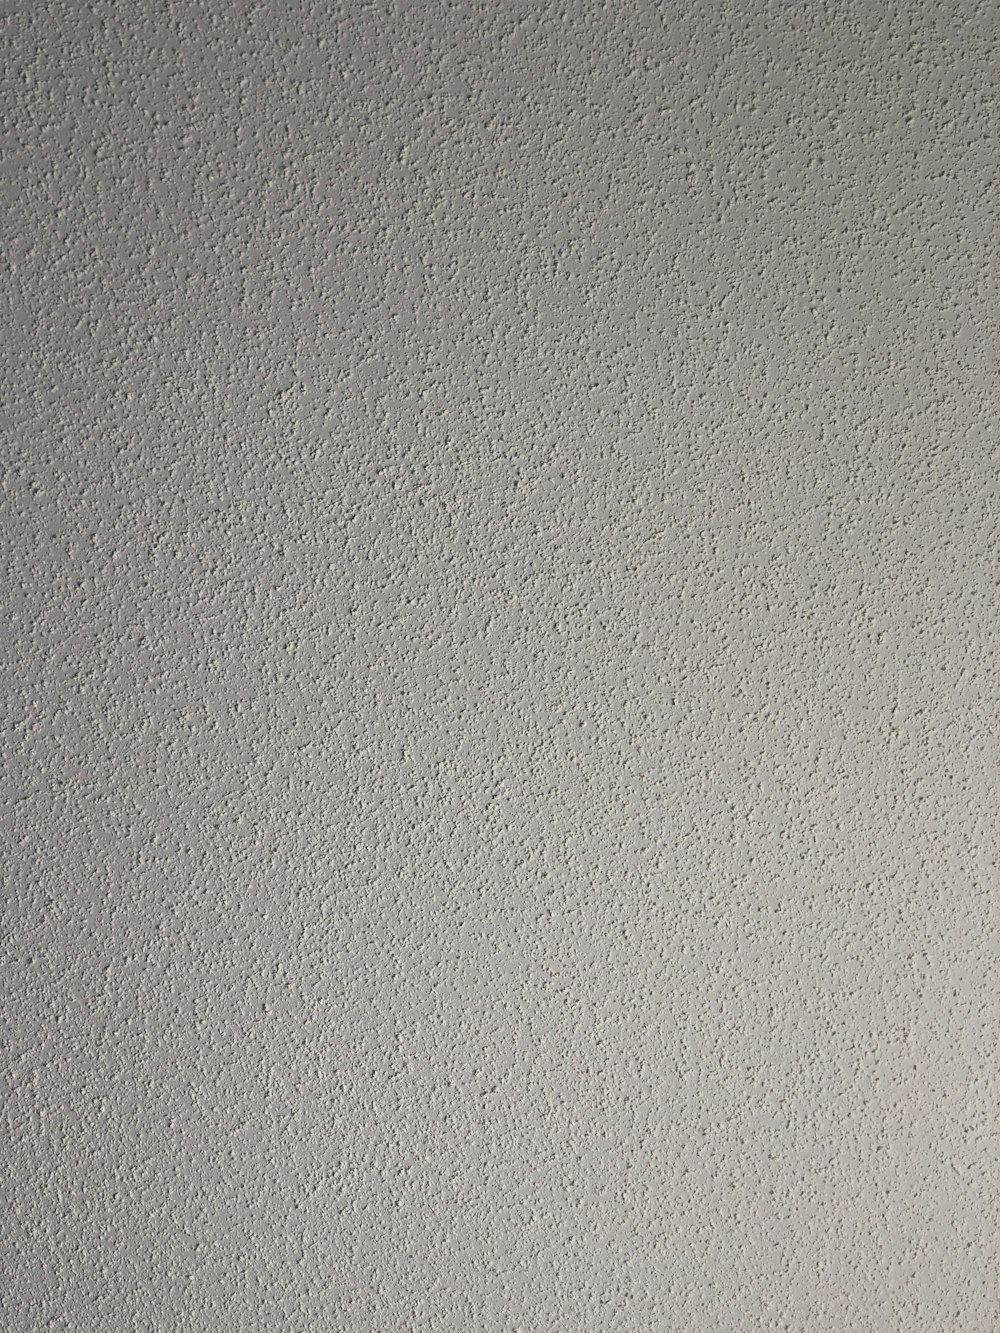 white painted wall